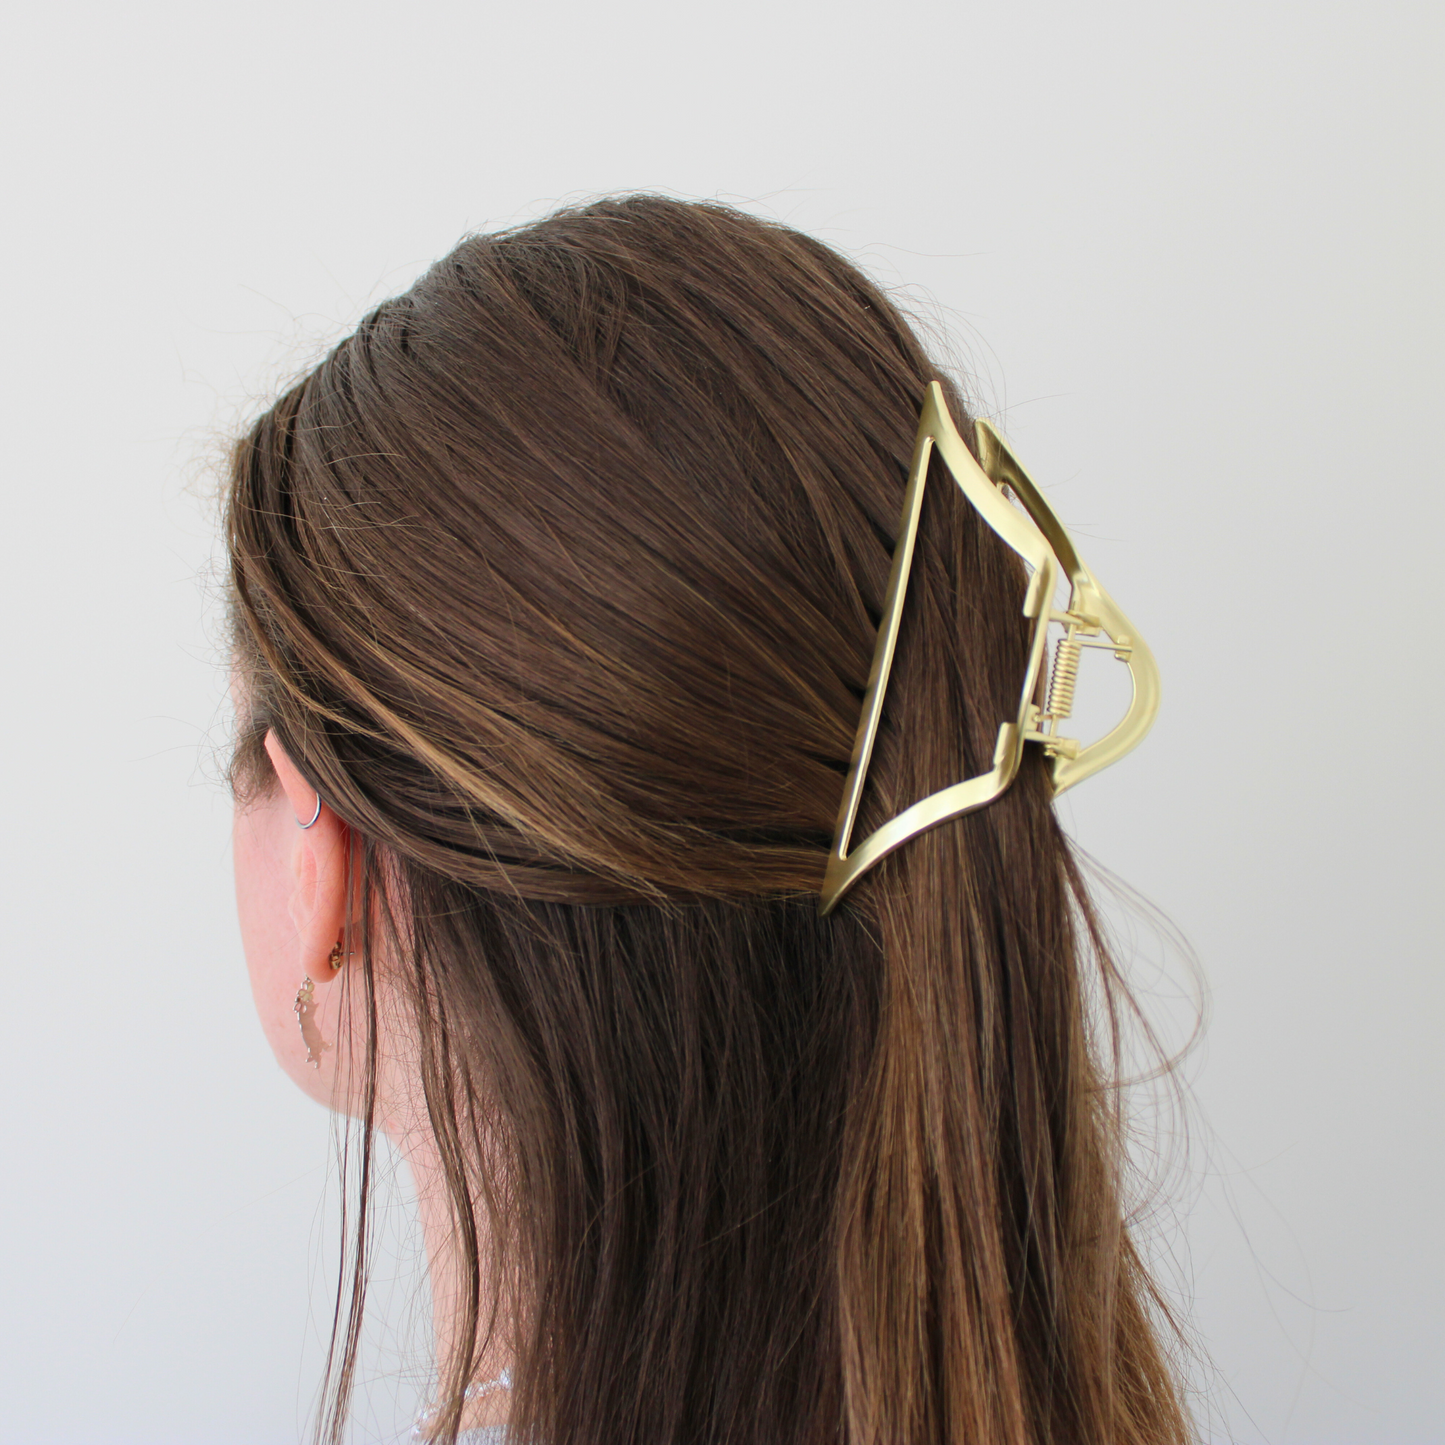 Brushed Gold Metal Hair Claw Clips